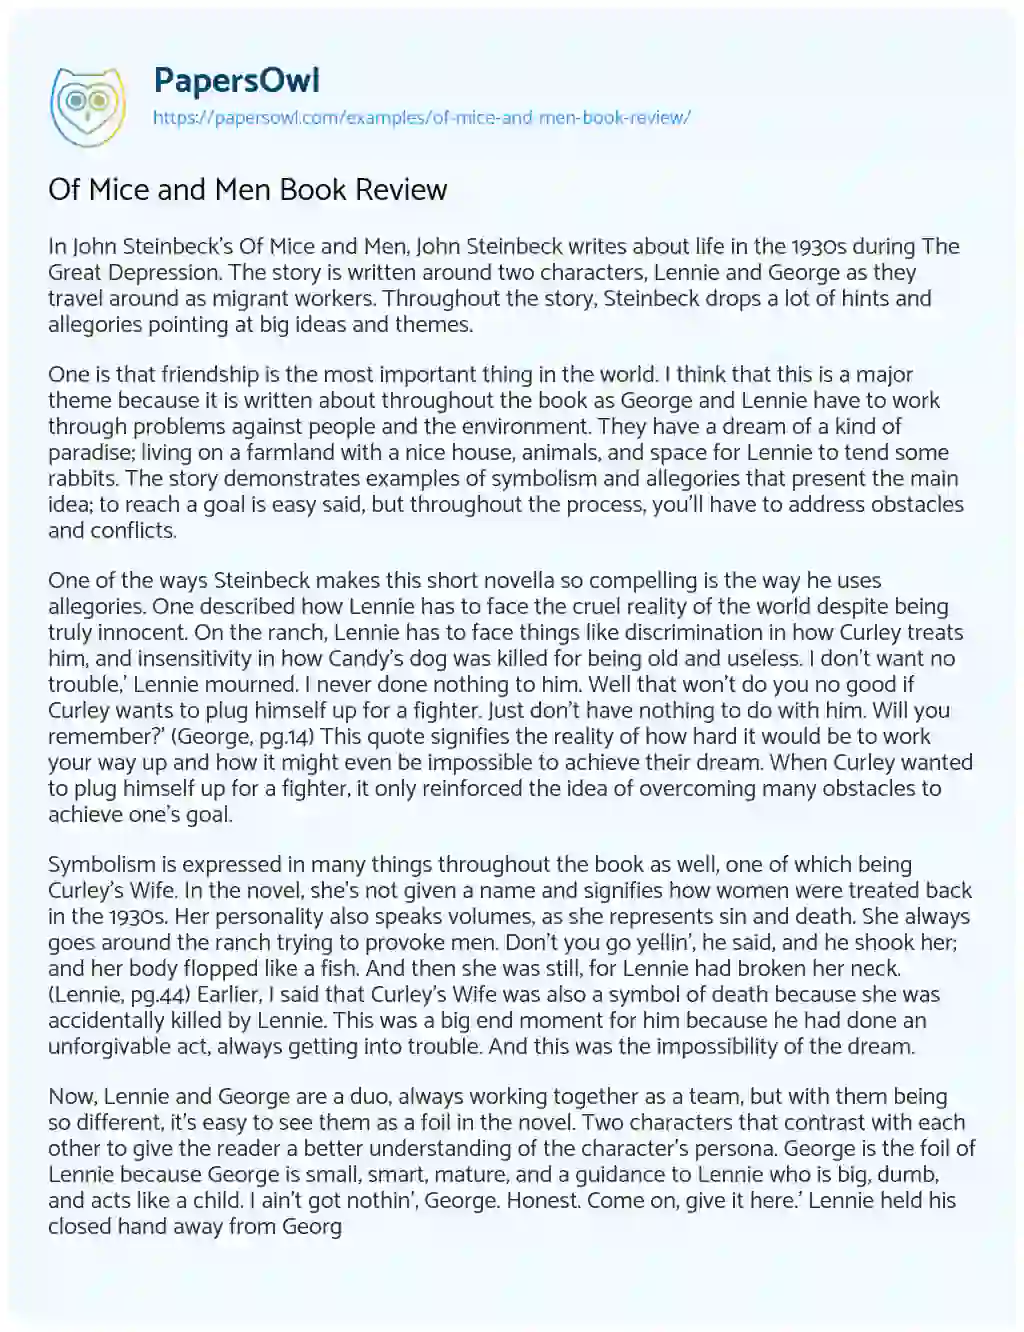 Essay on Of Mice and Men Book Review